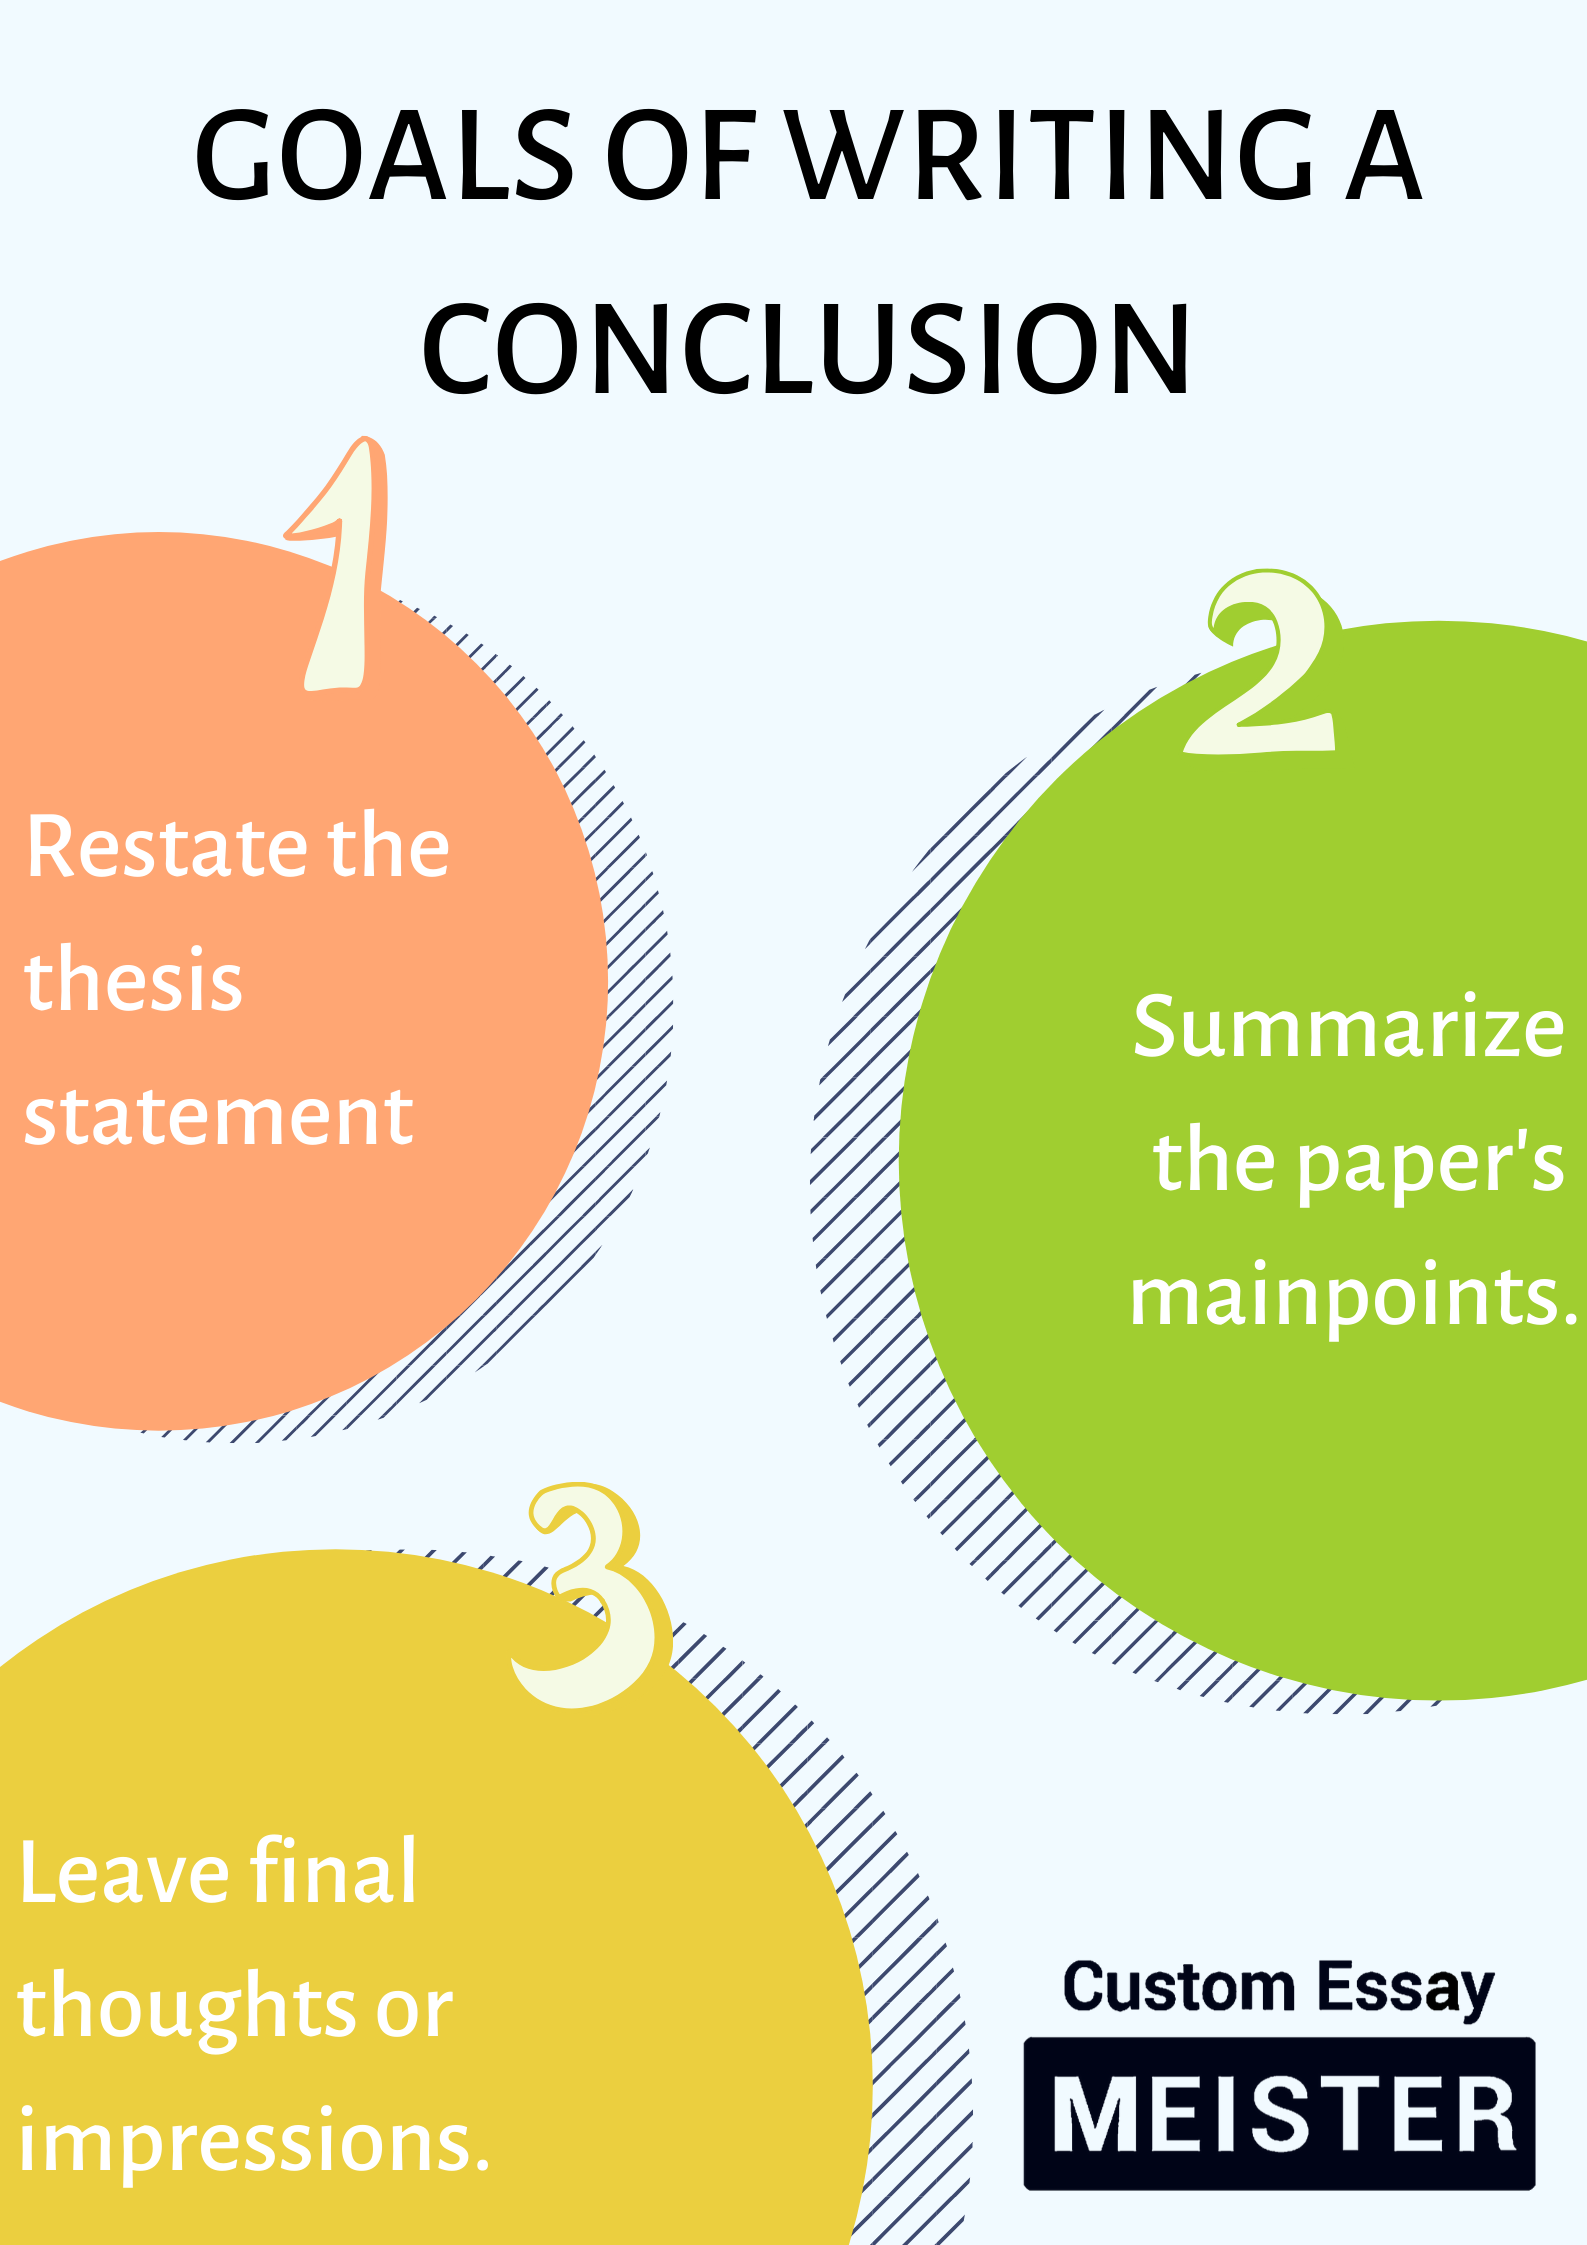 how to restate a thesis example